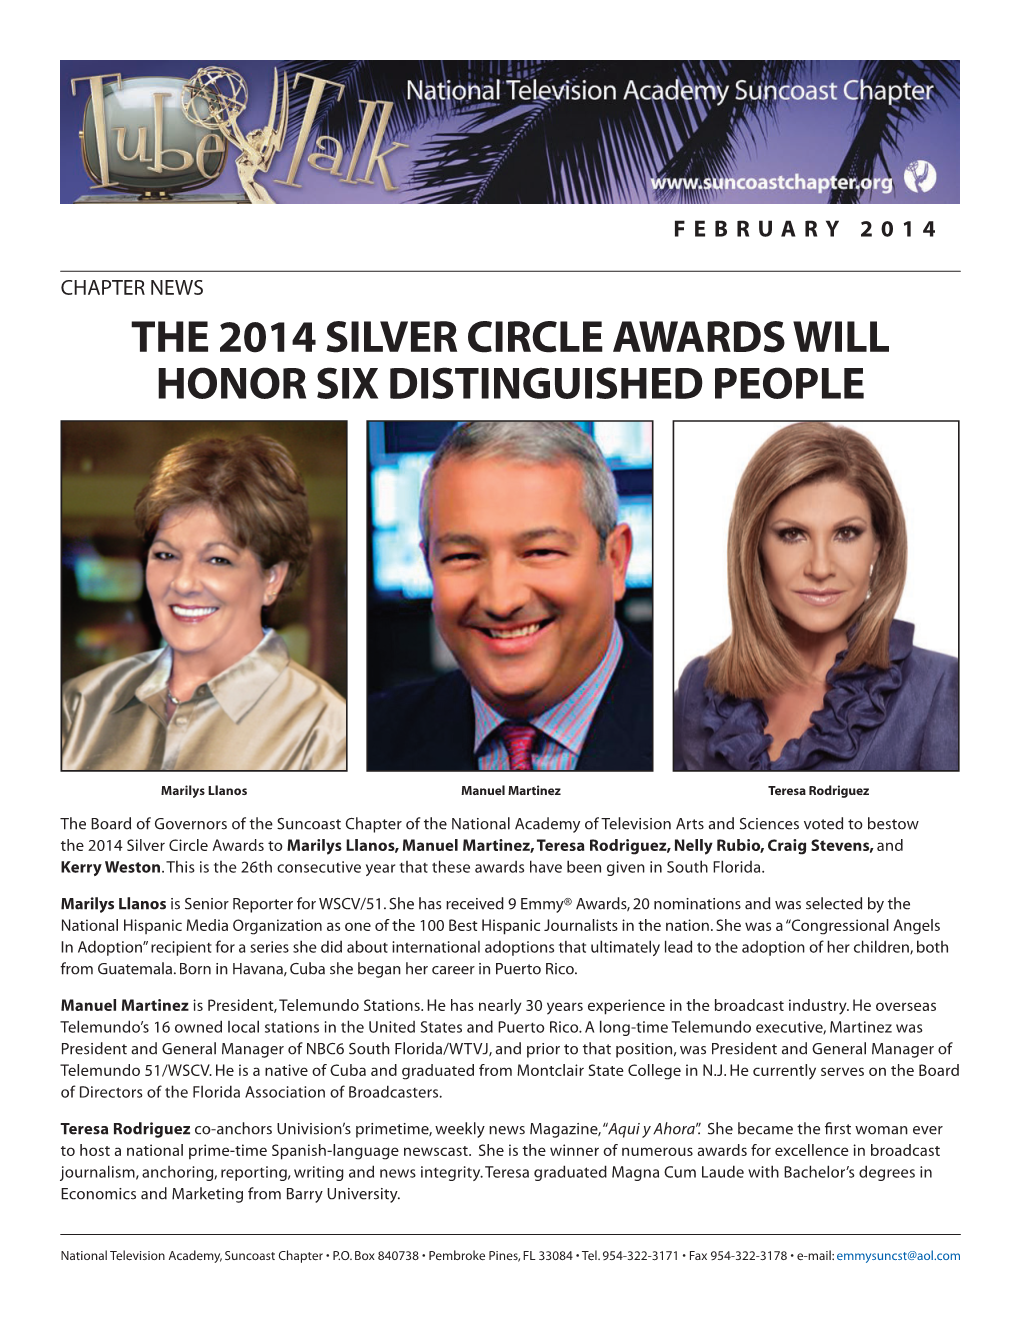 The 2014 Silver Circle Awards Will Honor Six Distinguished People